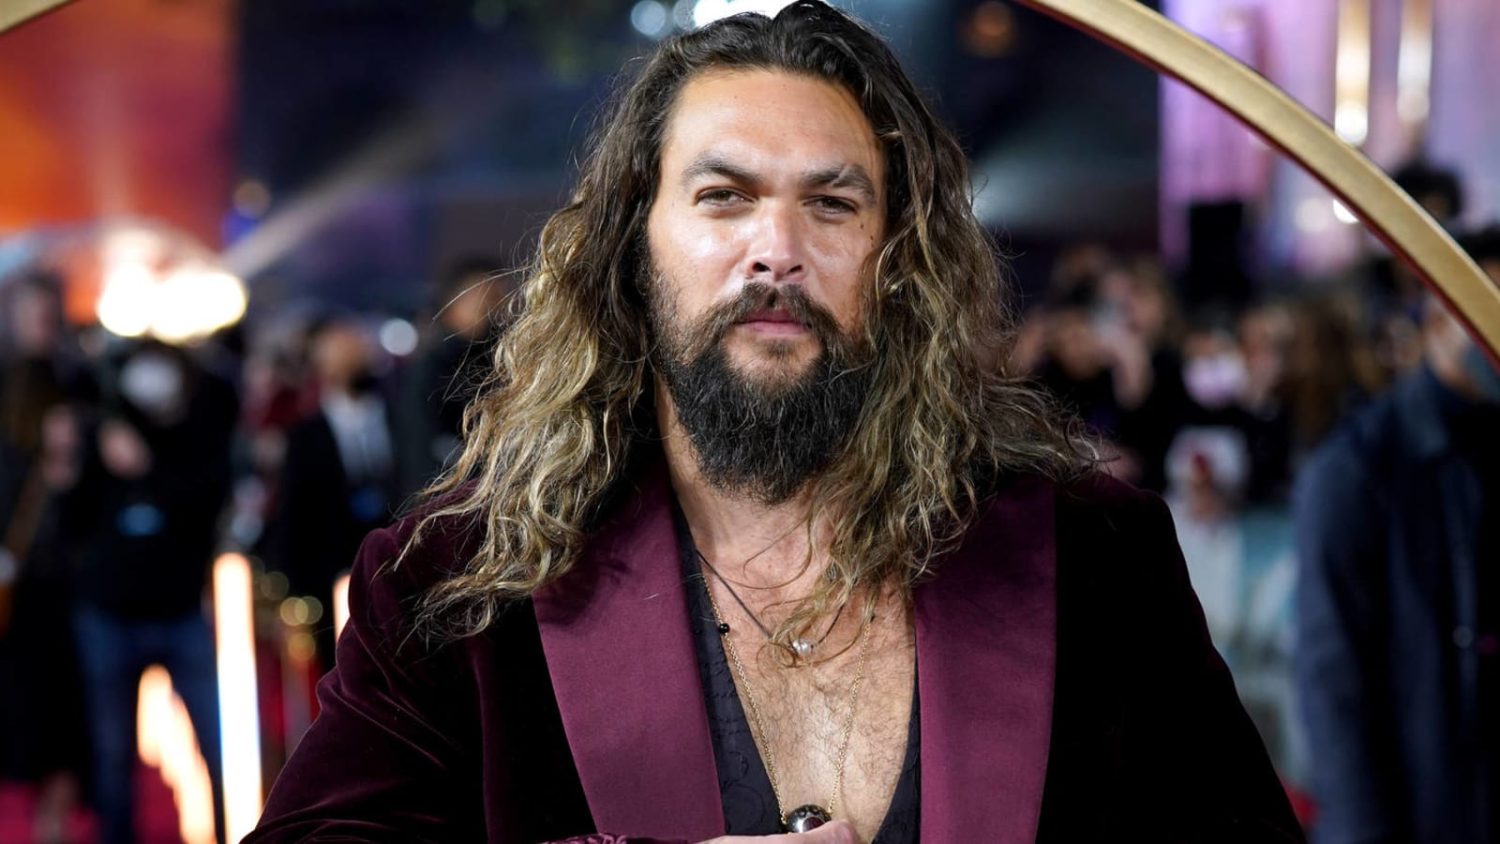 Aquaman Star Jason Momoa Involved In Head-on Collision With Motorcycle